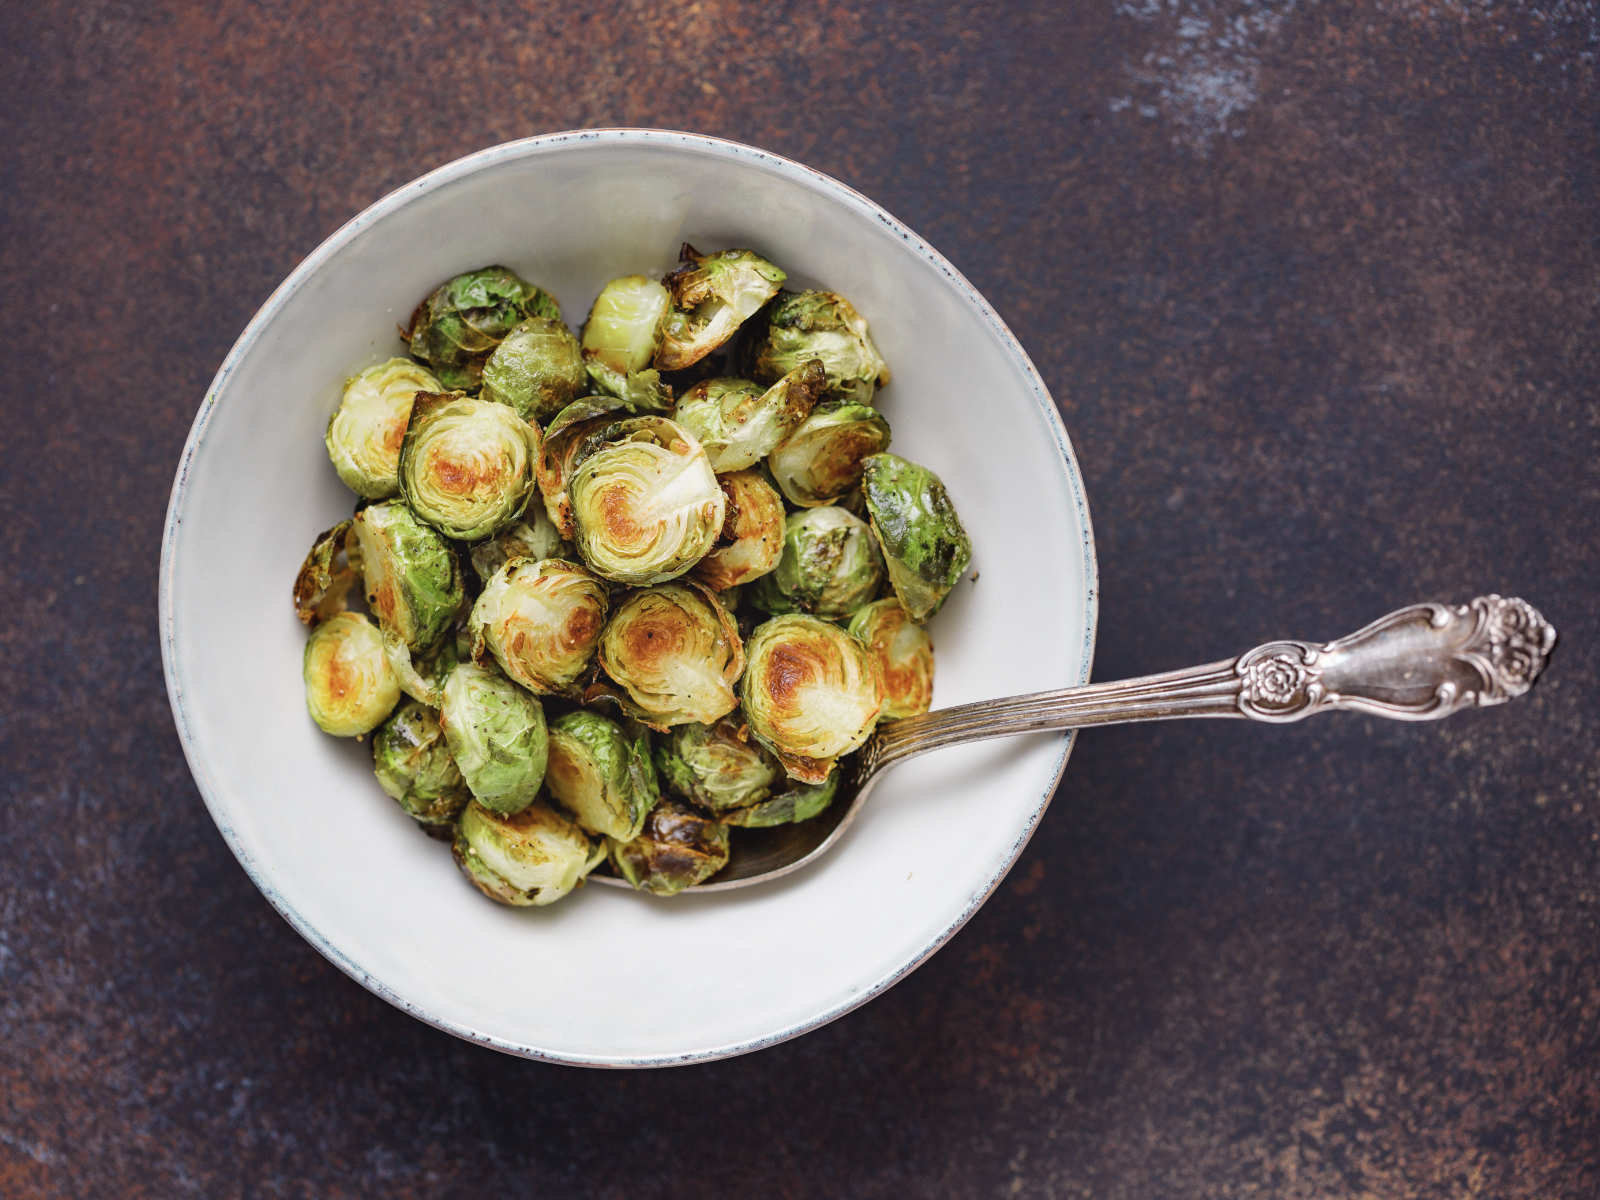 crispy brussels sprouts in a bowl